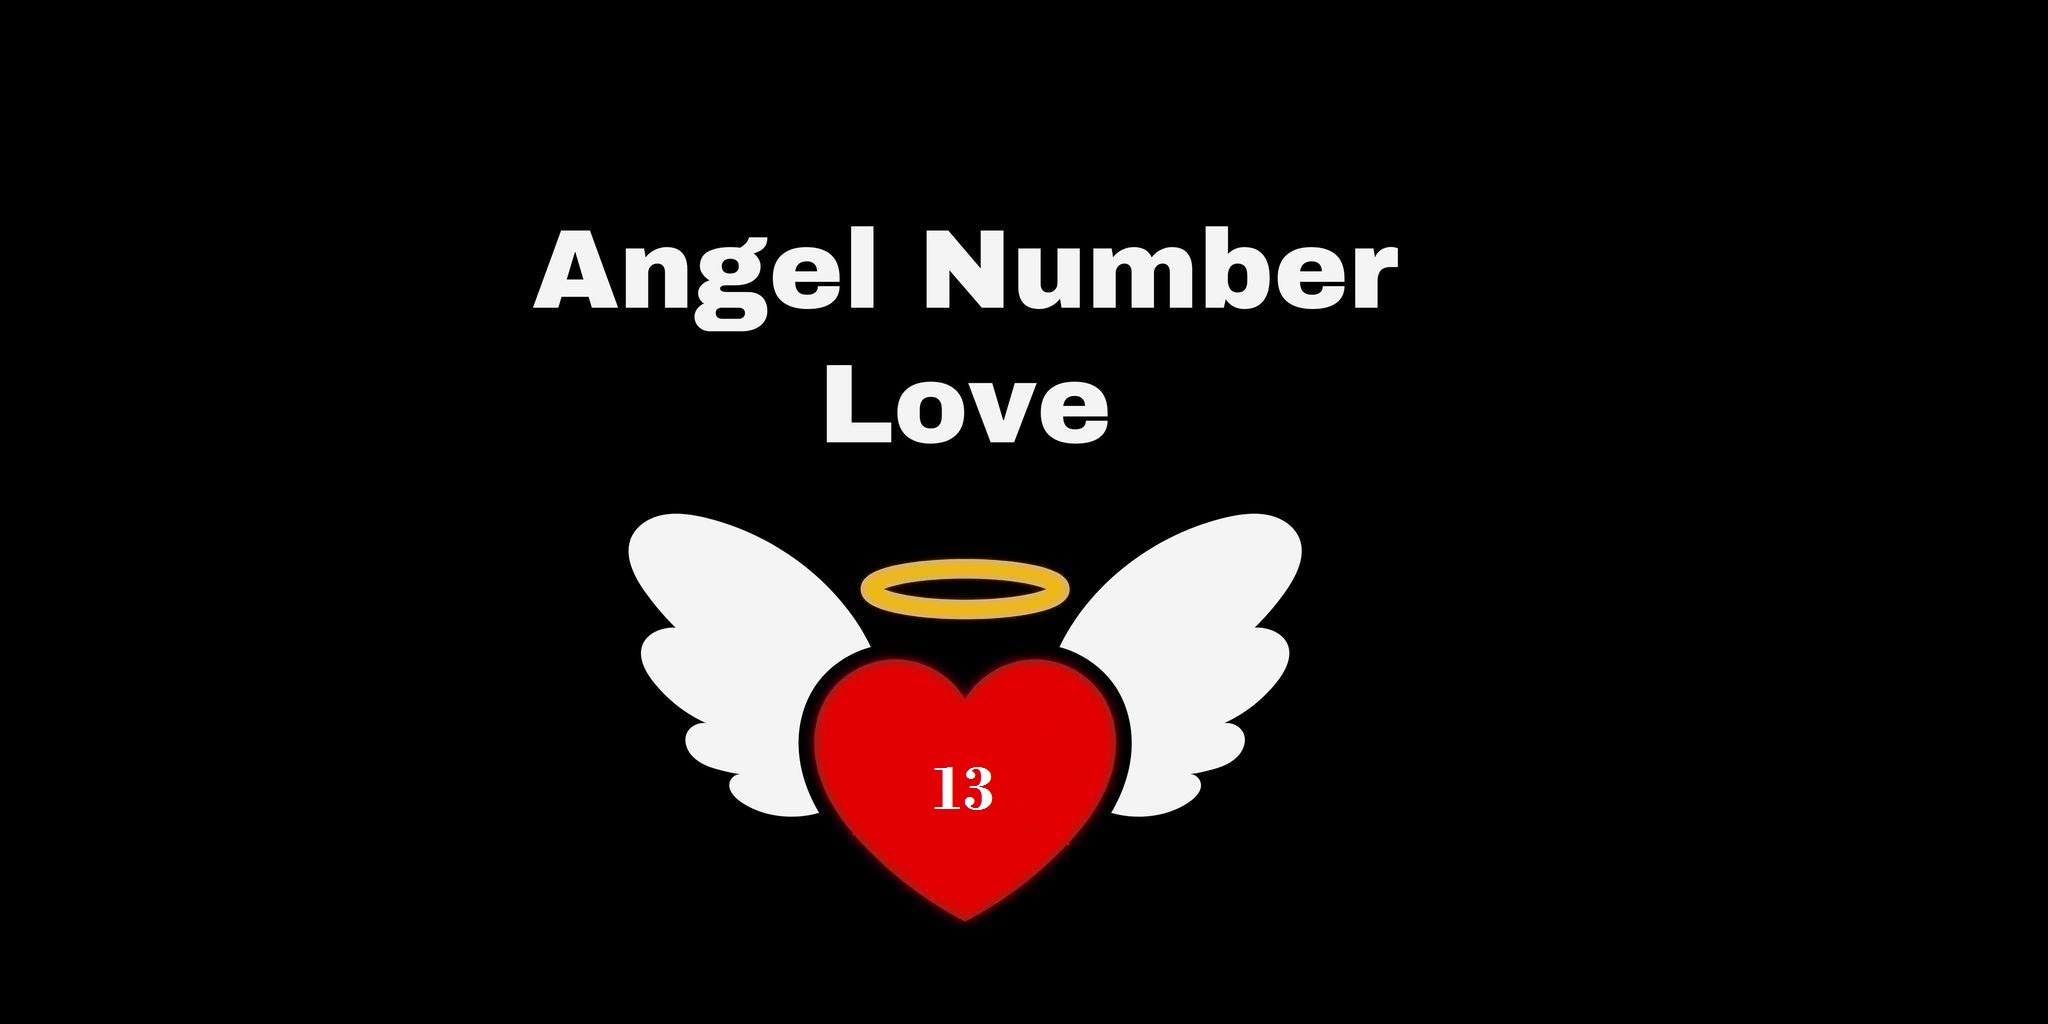 13 Angel Number Meaning In Love